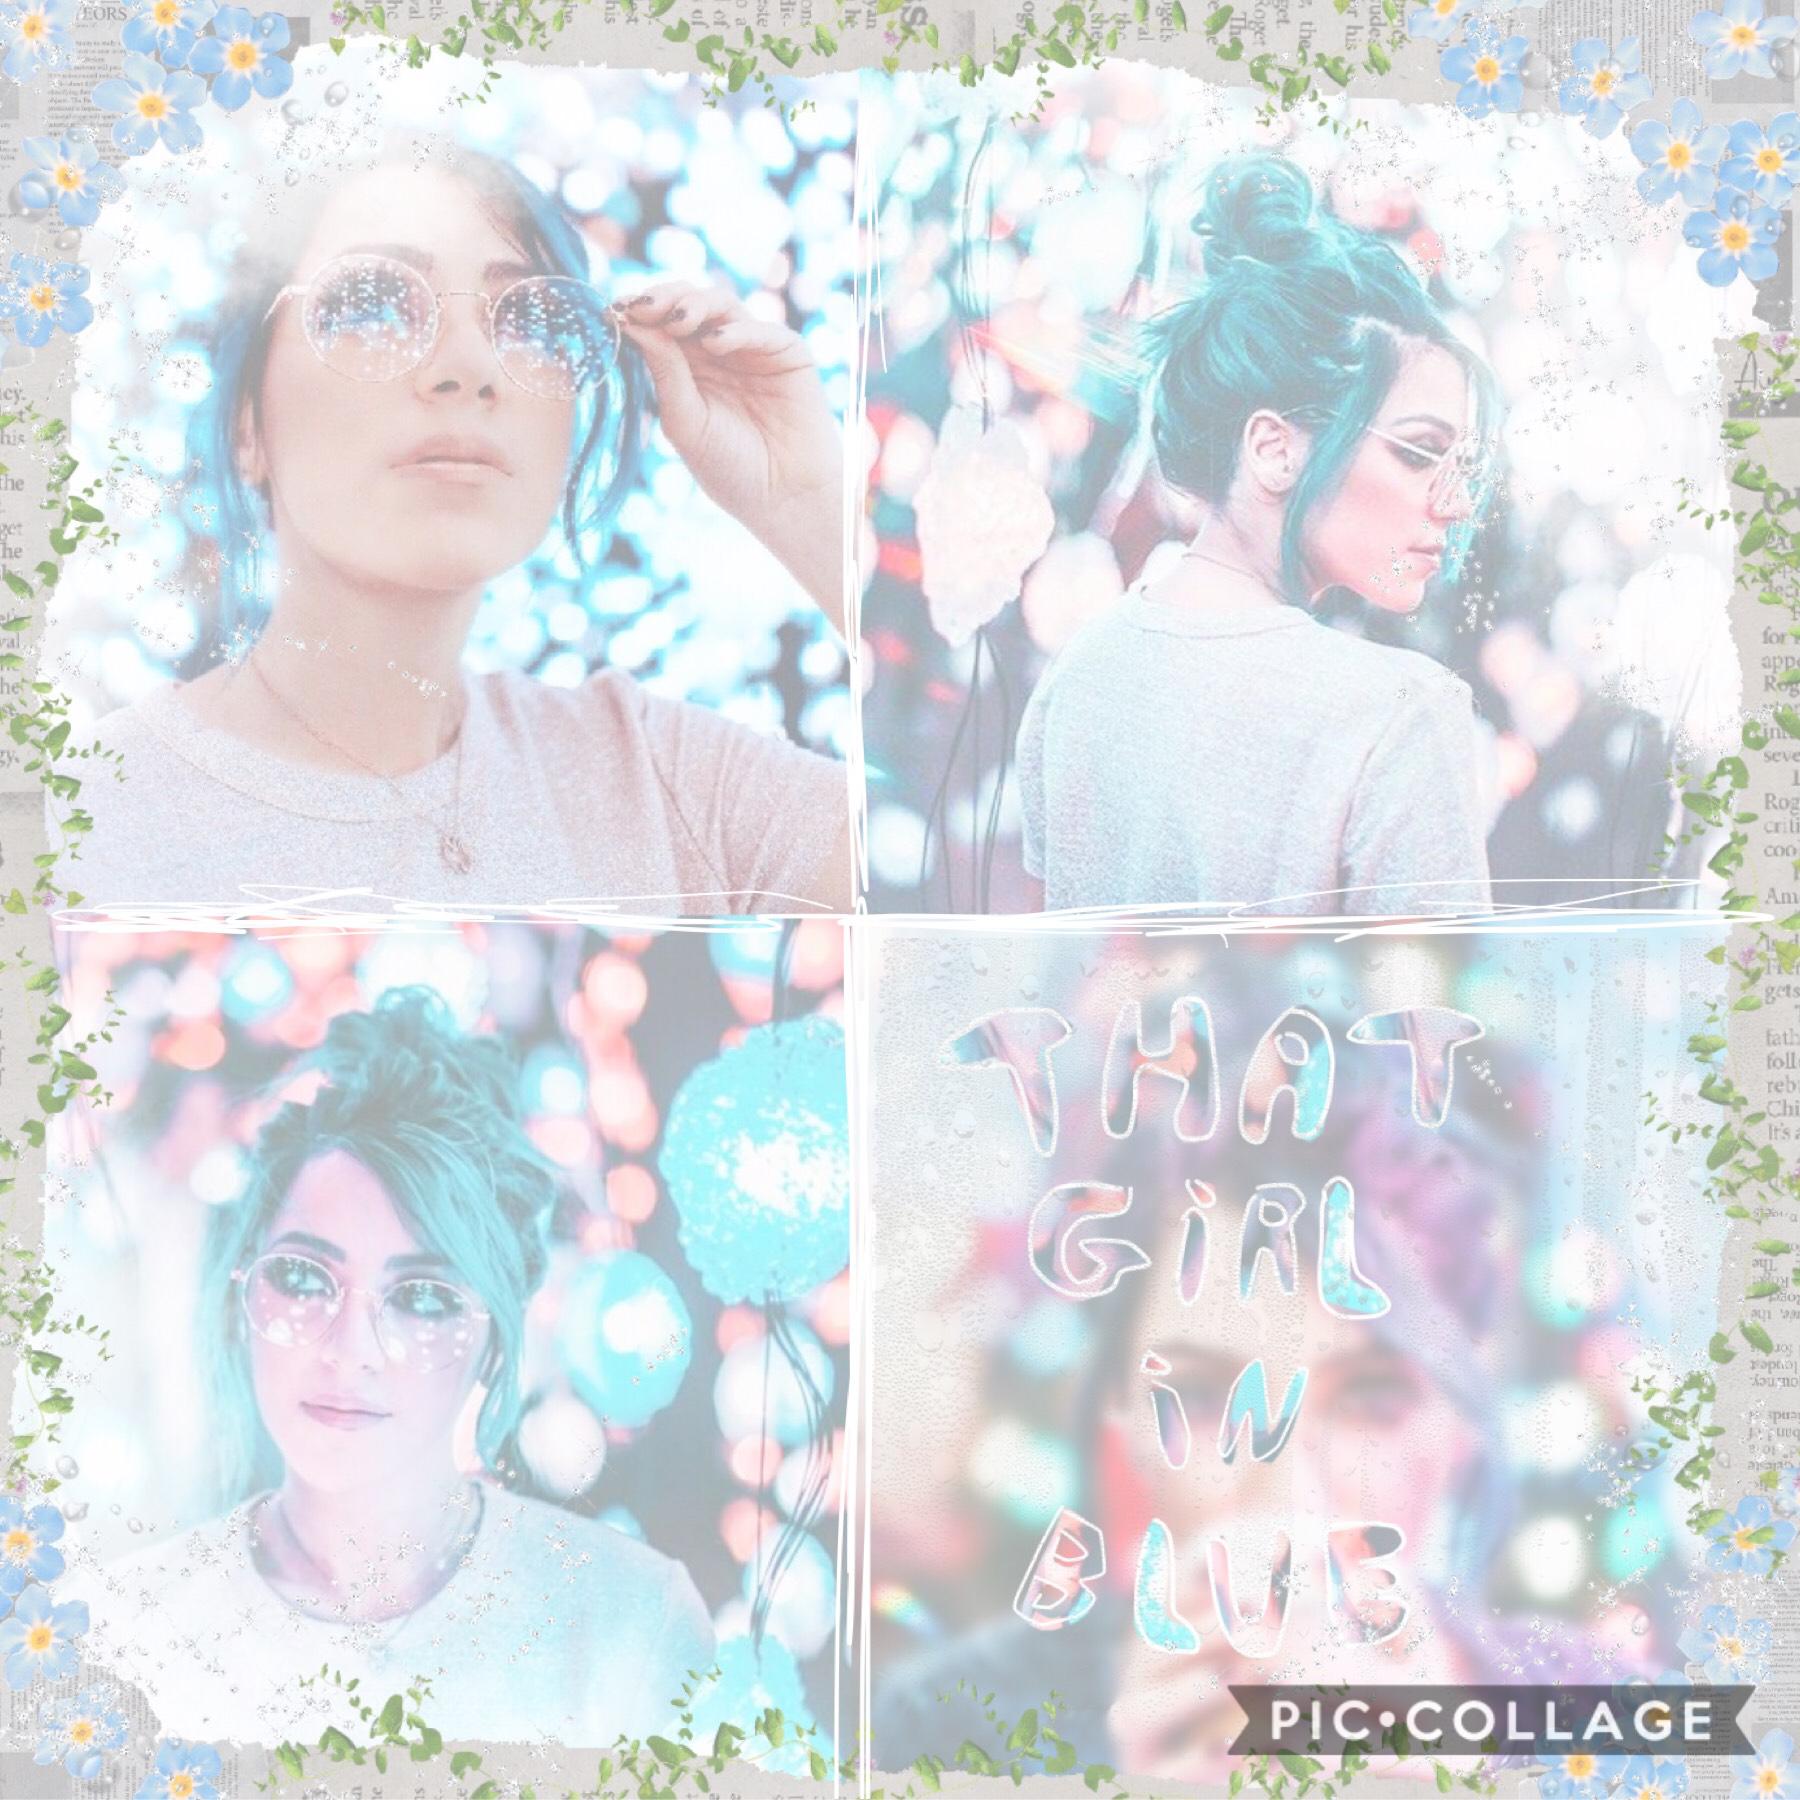 Tap
this was originally my entry for the YouTuber games on AlishaMarieSummer-Extras 
#teamnikidemar
But I decided it wasnt good enough 🤷‍♀️